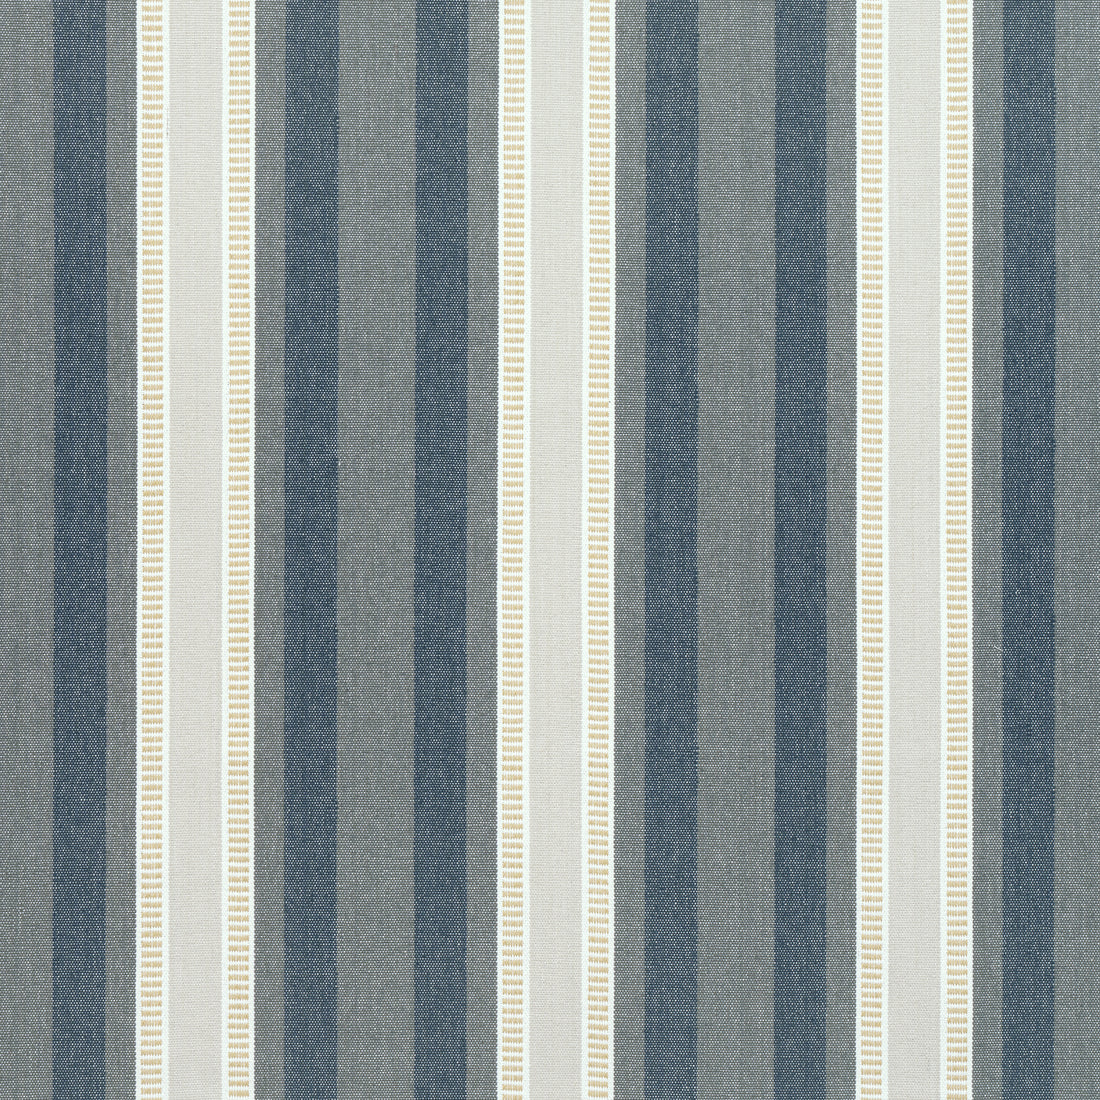 Dearden Stripe fabric in neutral color - pattern number AW23155 - by Anna French in the Willow Tree collection